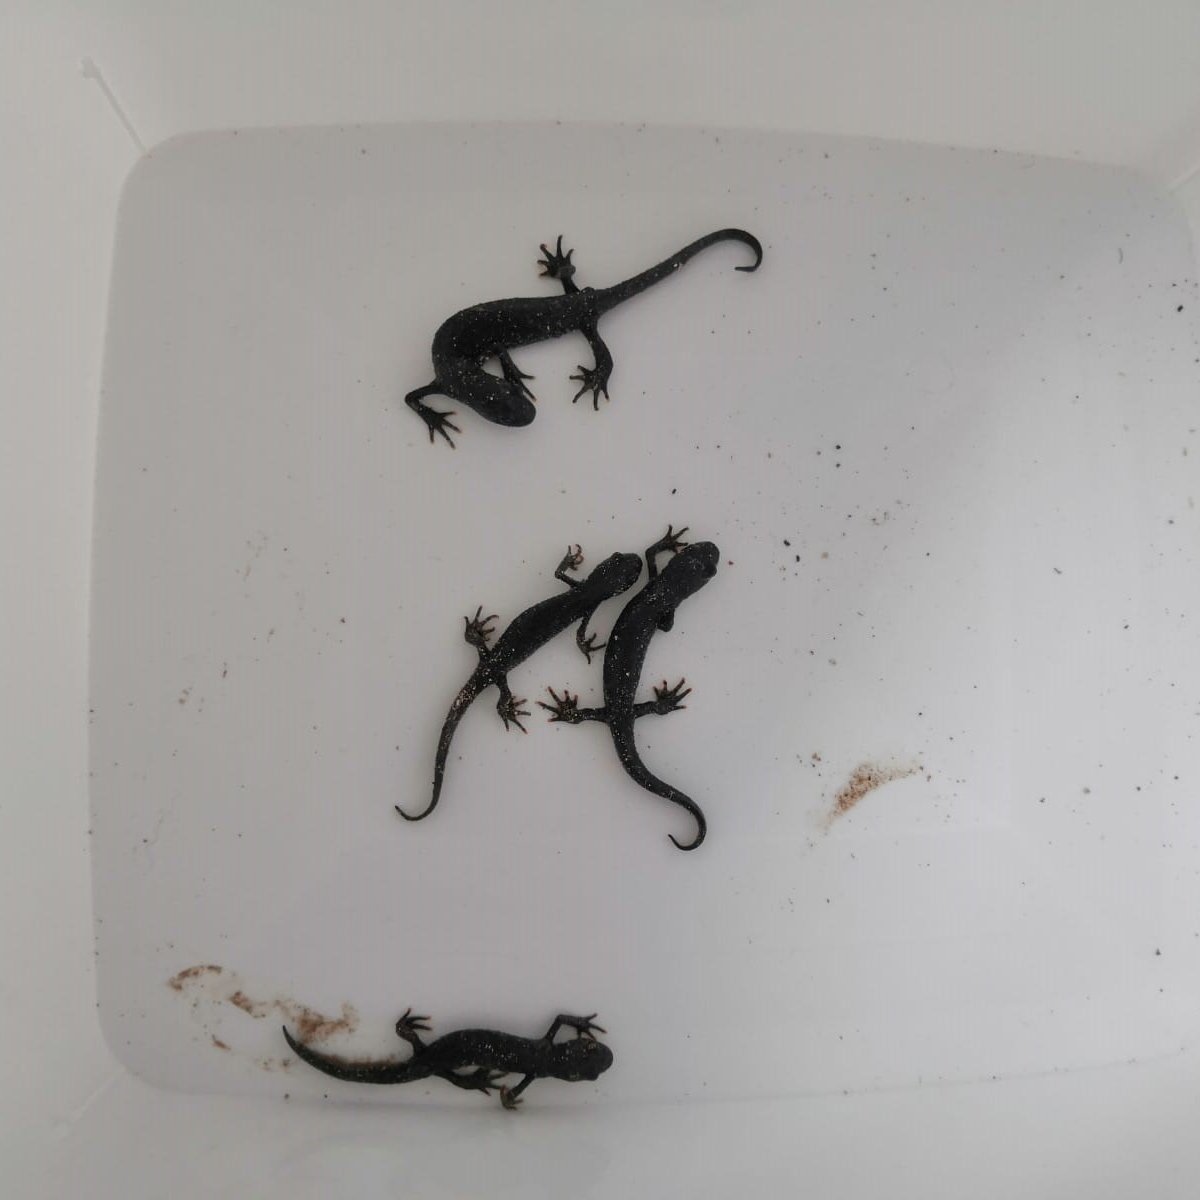 Newts on the move!

We have had Great Crested Newts overwintering in the cellar at our offices.

These guys are now on the way to our ponds!

#greatcrestednewt #gcn #newts #ukamphibians

(Photos taken under licence)